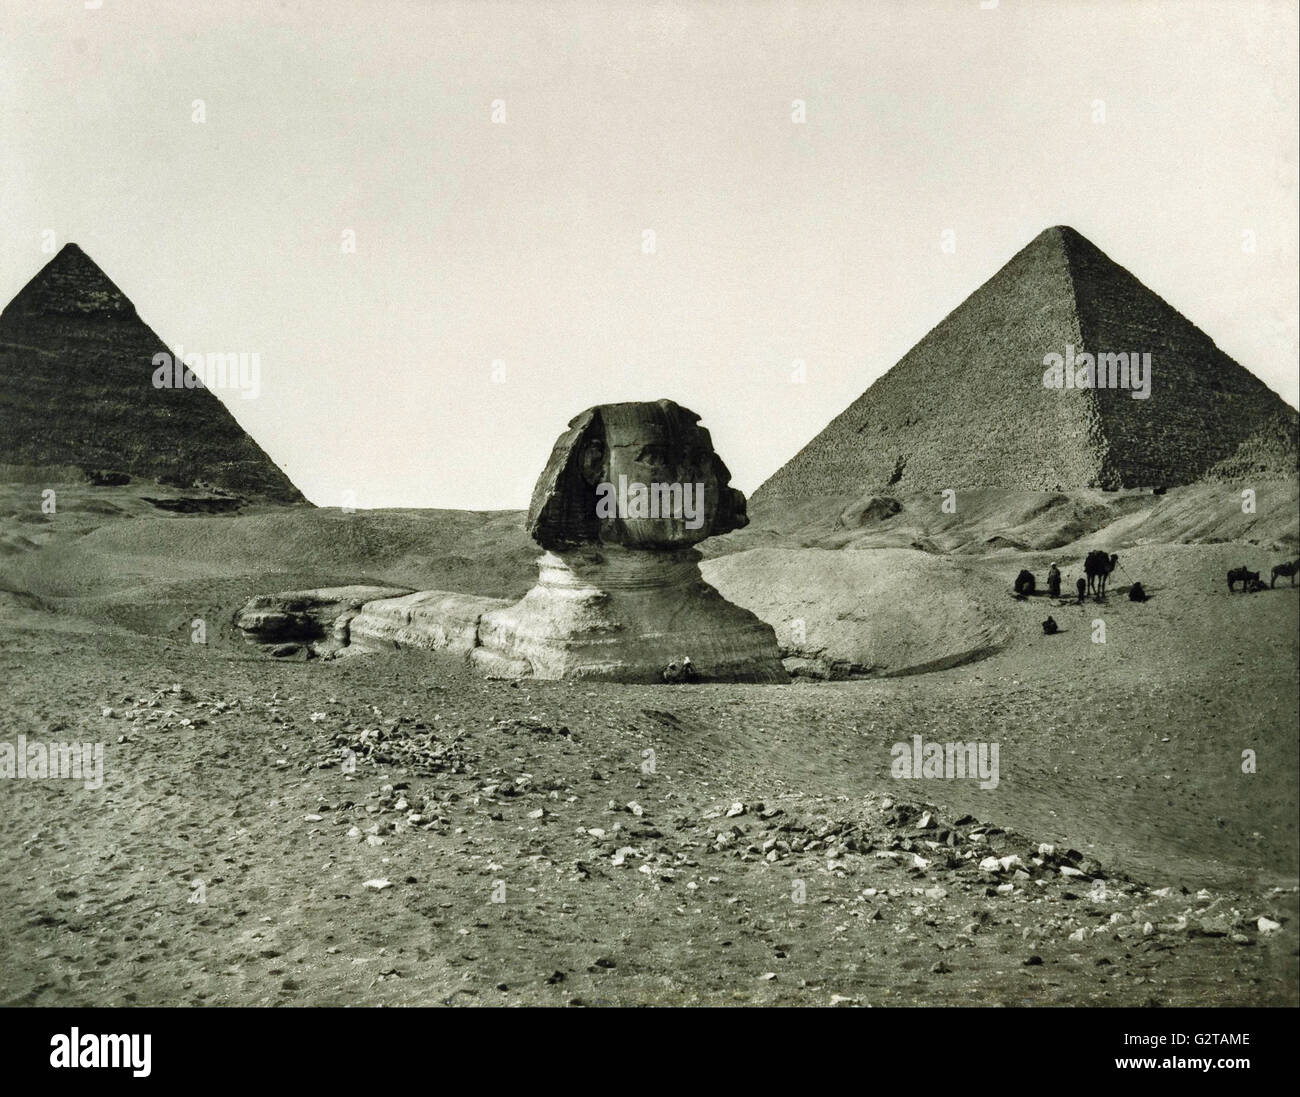 Adolphe Braun - The Sphinx and the Pyramids - Stock Photo